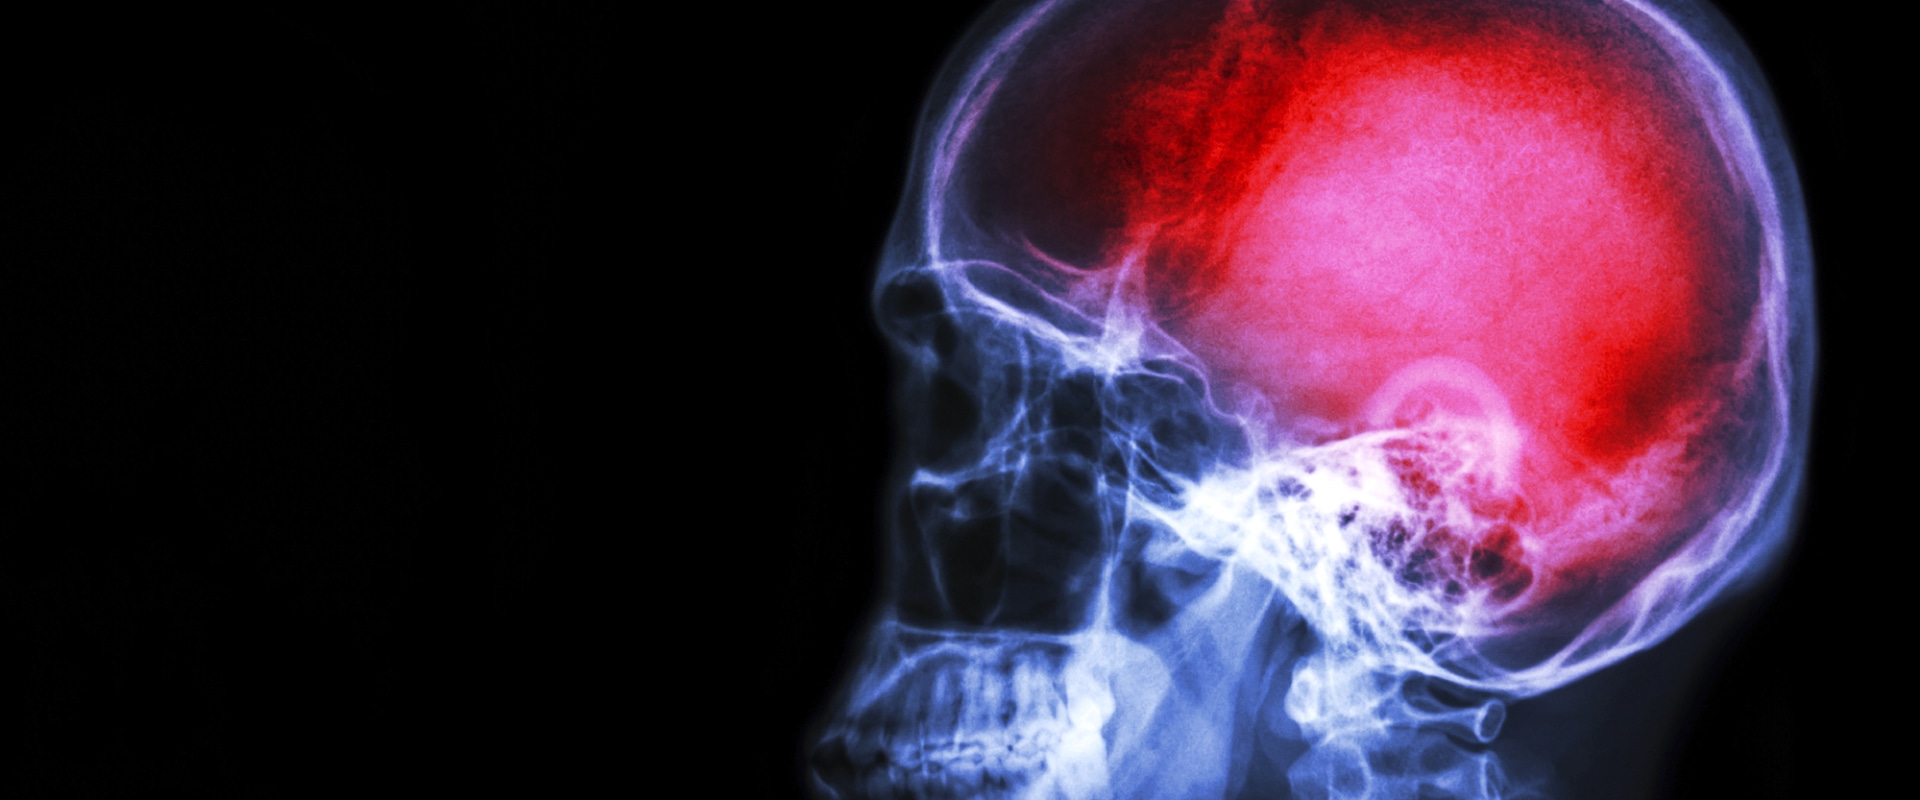 Can pain change the brain?